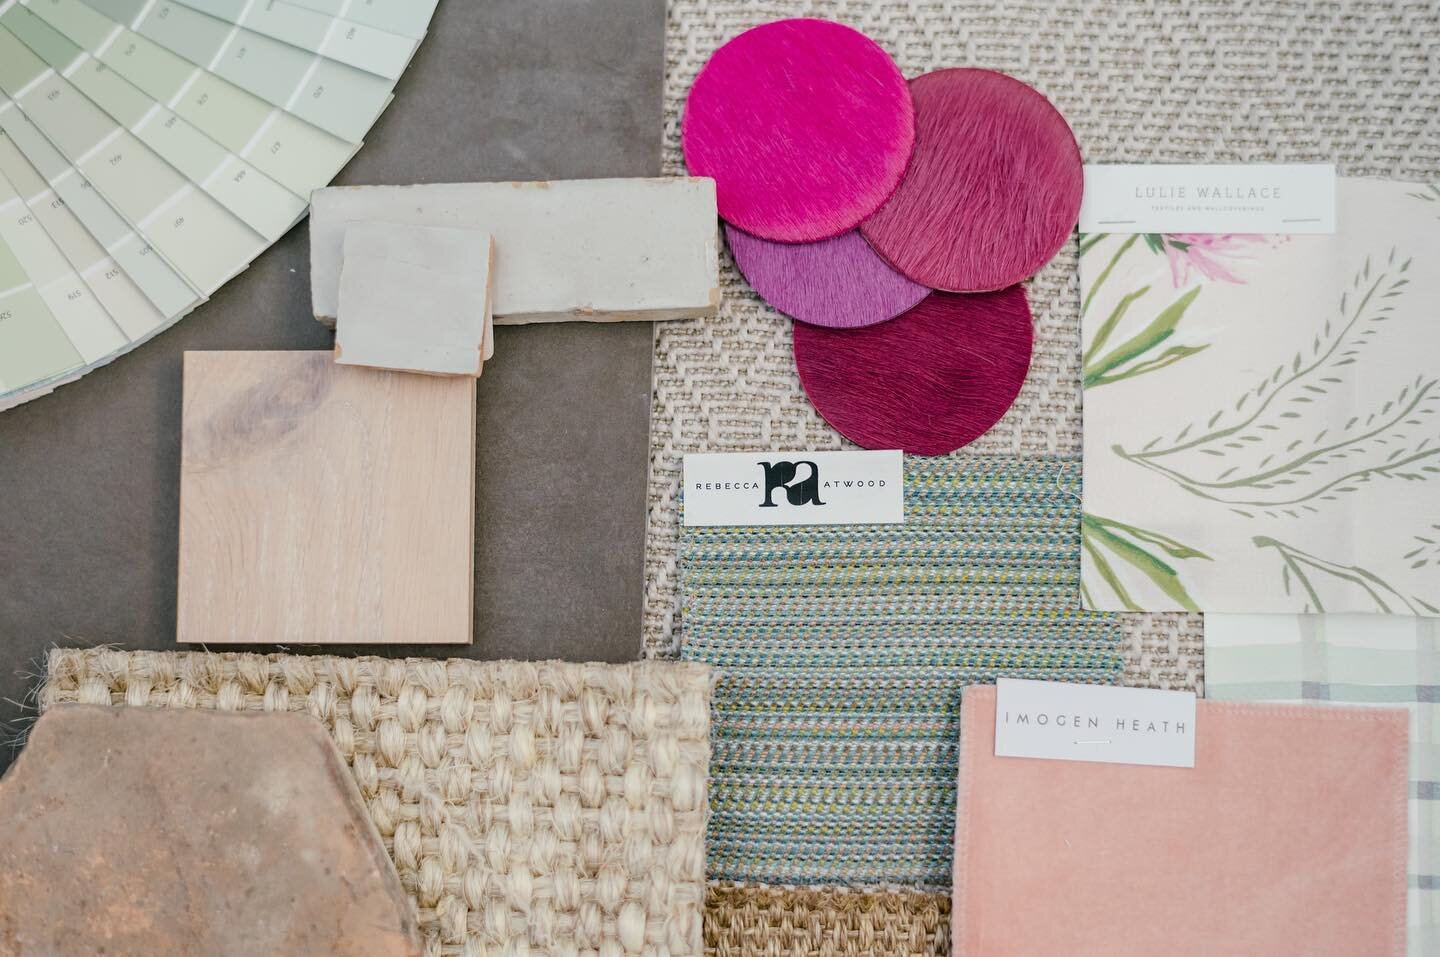 Pink-A-Boo!&nbsp;
Pairing bold colors doesn&rsquo;t have to be scary! We l💗ve how the subtle pop of pink plays off the warm sage and natural elements in this flat lay. 🥰 #LiveinColor #MarianLouiseDesigns
.
.
.
#interiorstyling #livedincomfort #desi